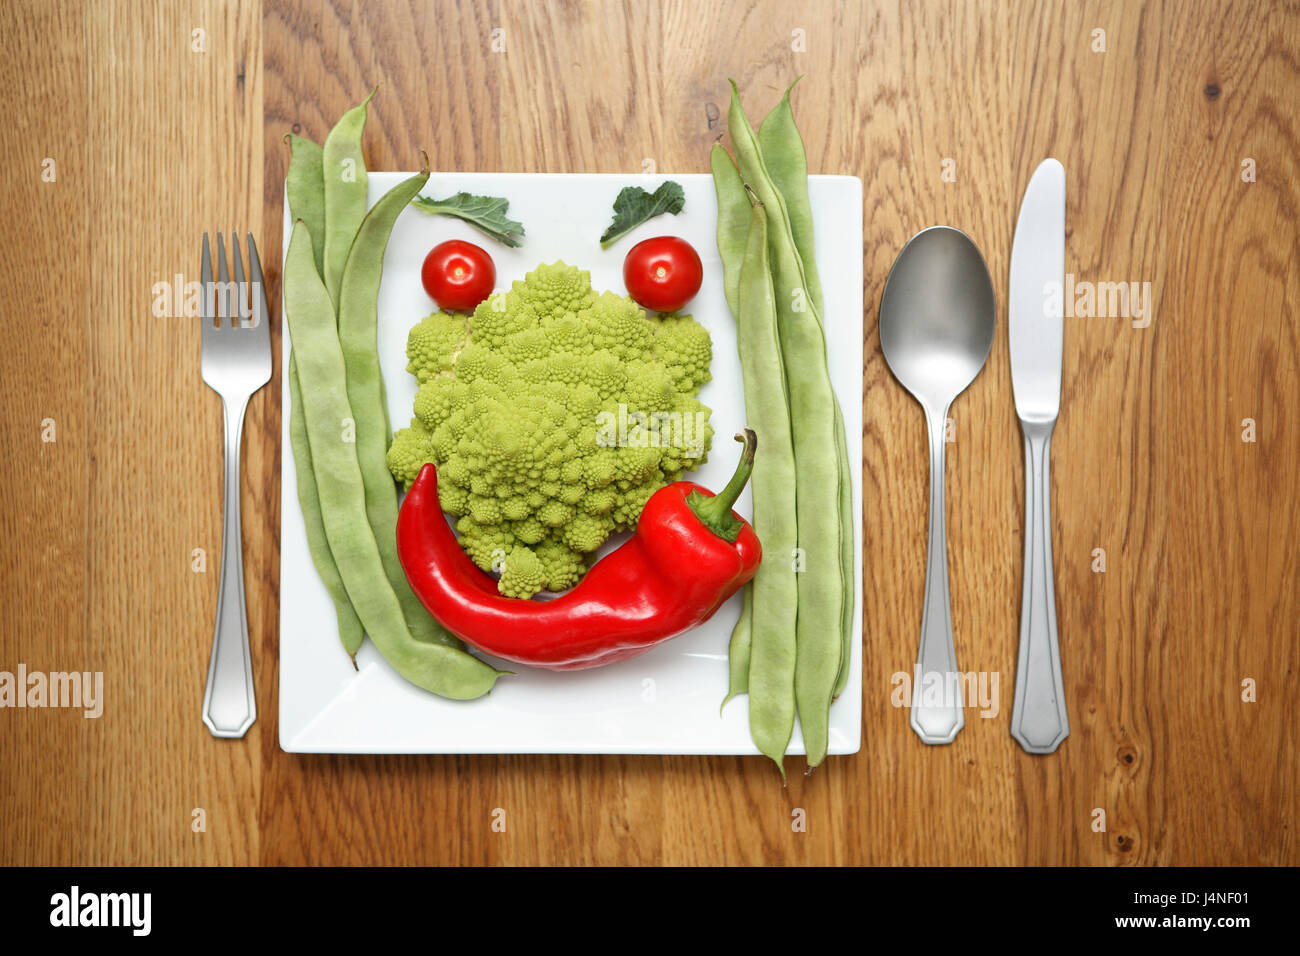 Plate, instruments, vegetables, raw, array, look, Stock Photo